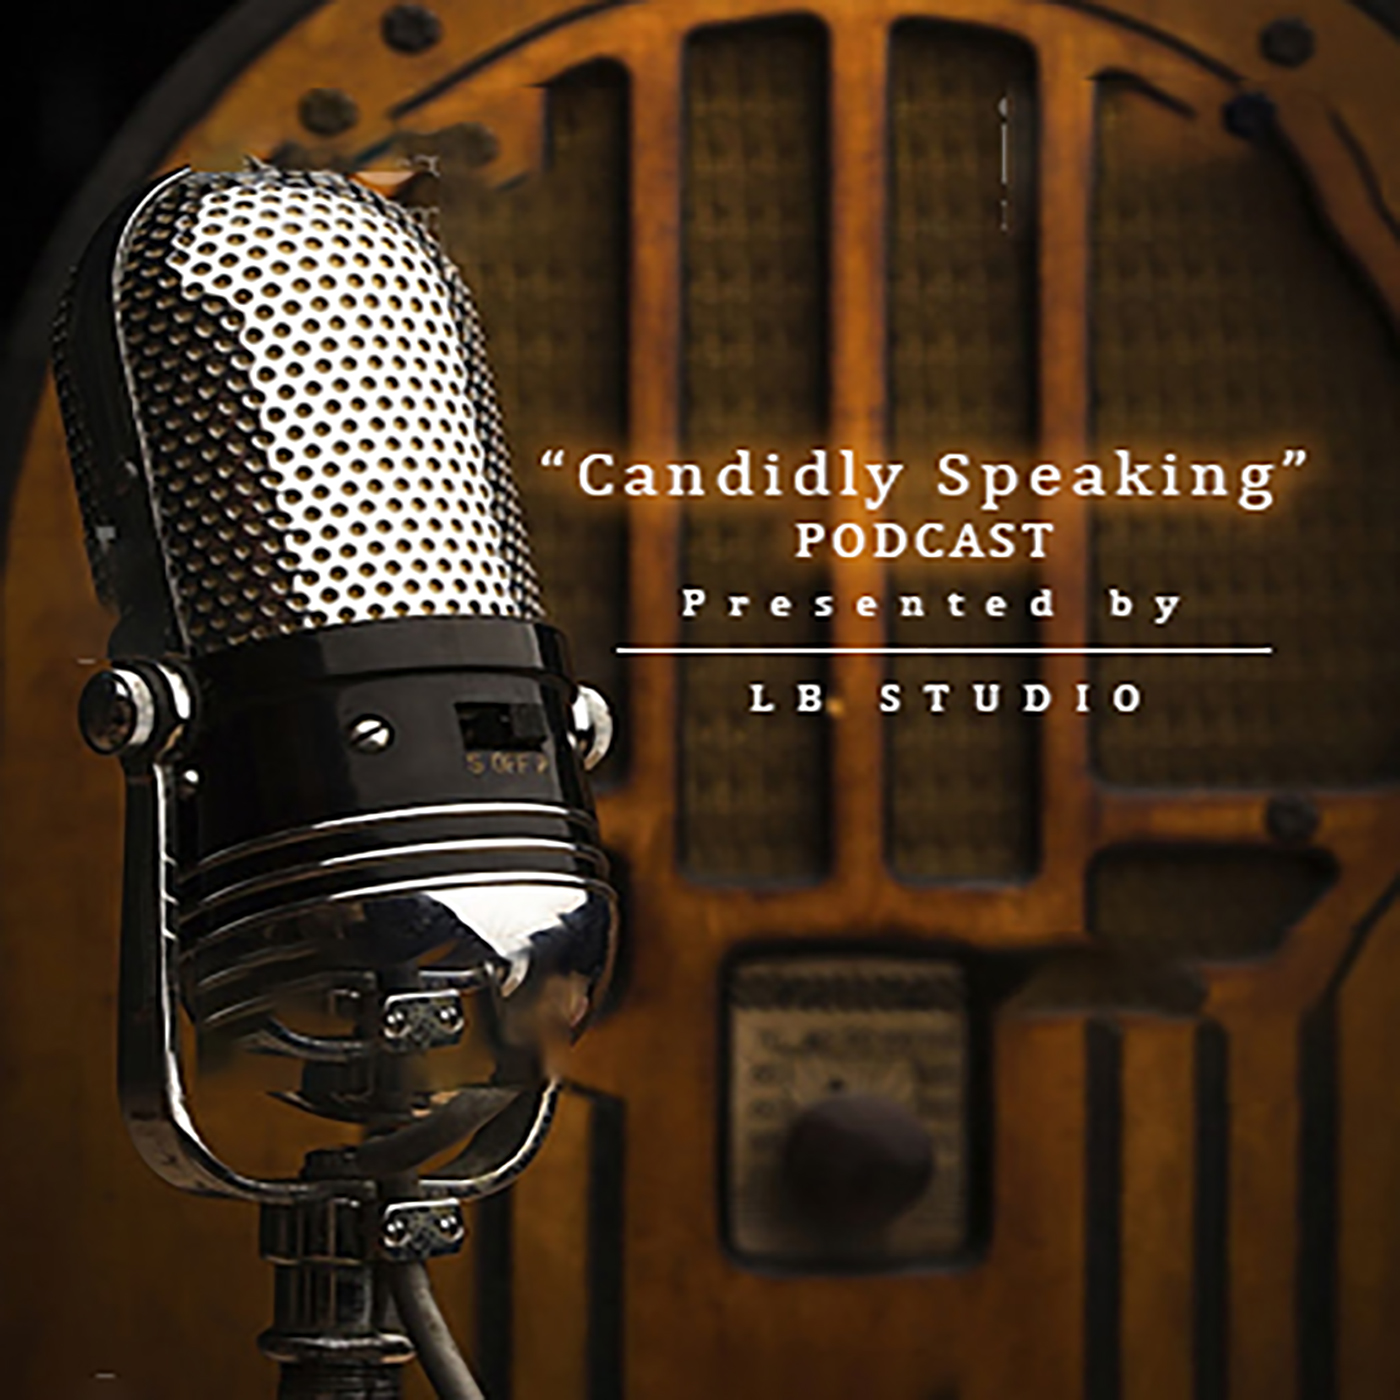 Candidly Speaking Podcast